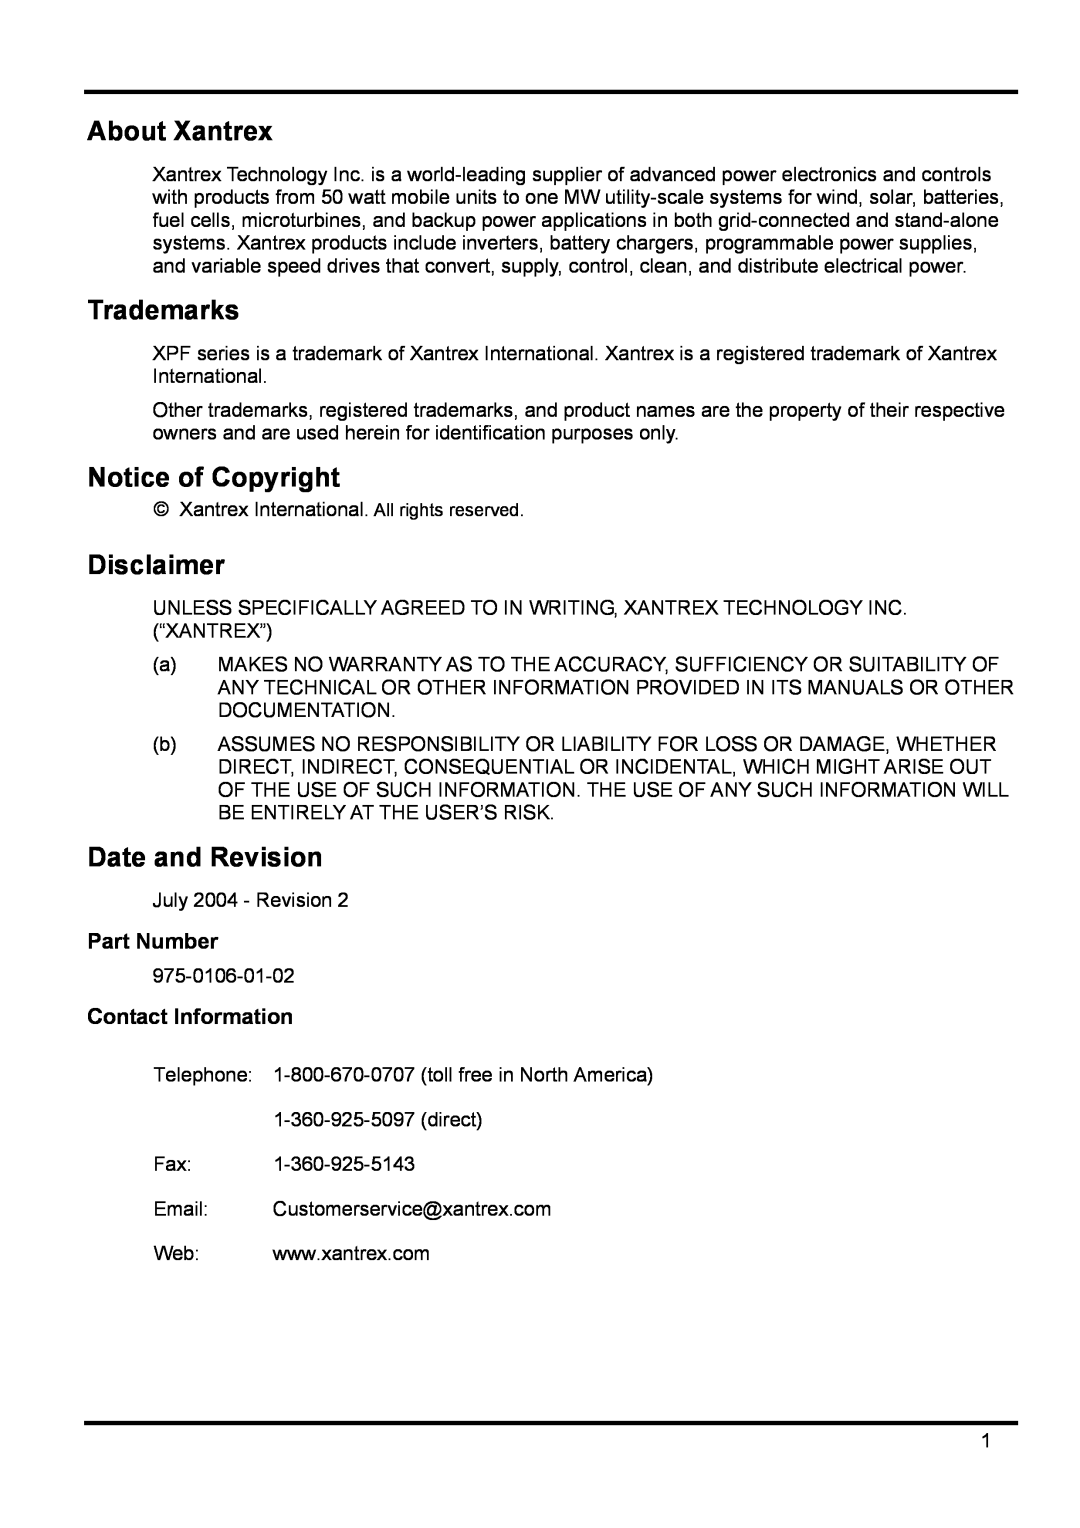 Xantrex Technology XPF 35-10 About Xantrex, Trademarks, Notice of Copyright, Disclaimer, Date and Revision, Part Number 